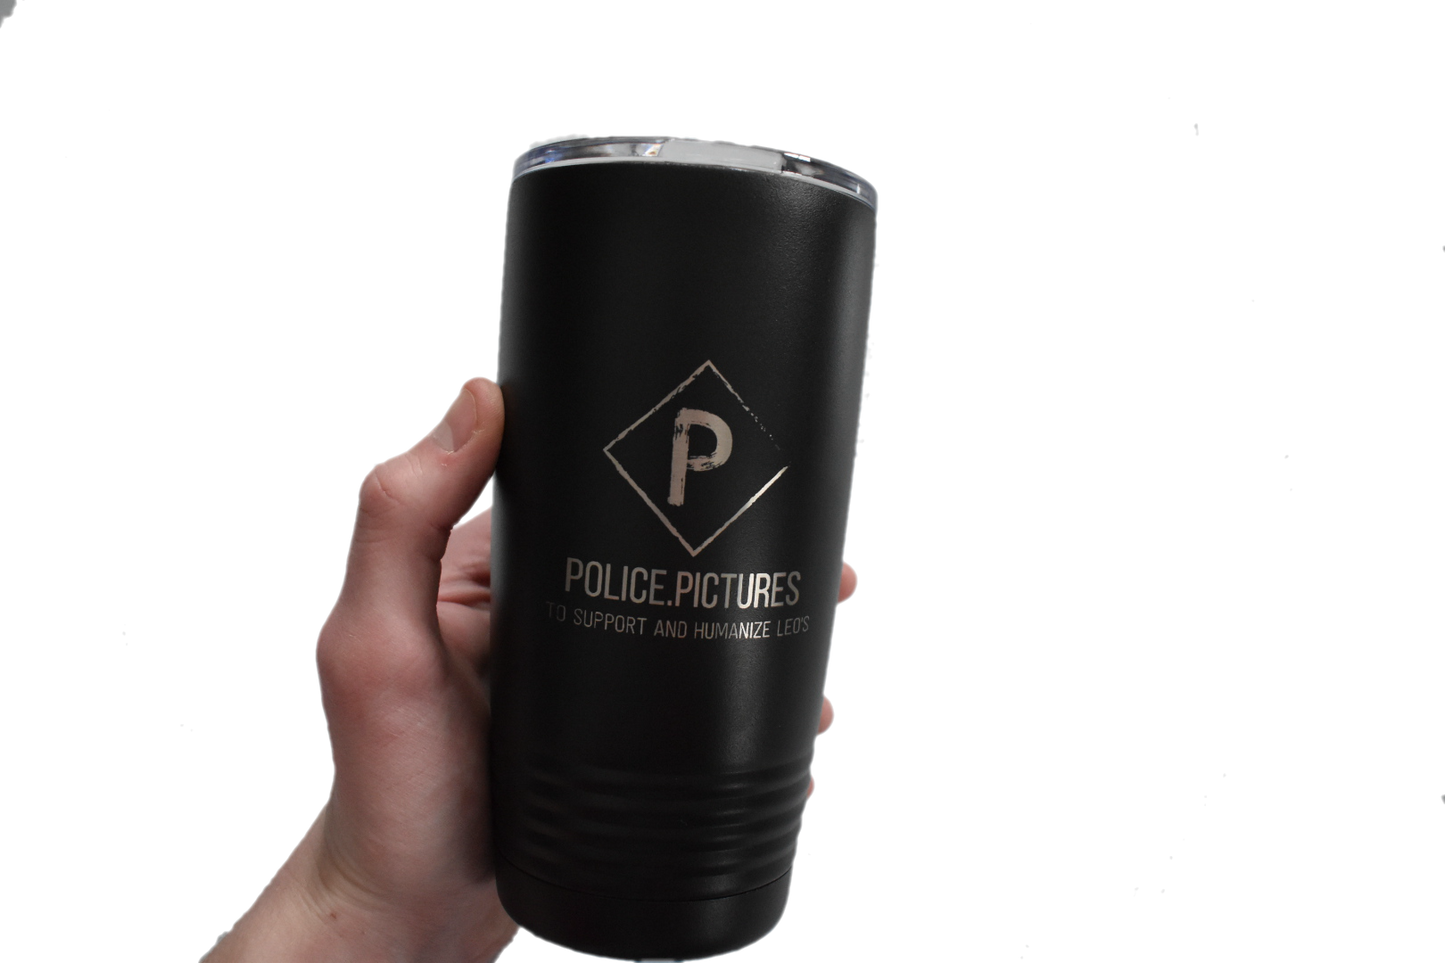 Old Style Police Pictures 20 oz Engraved Tumbler